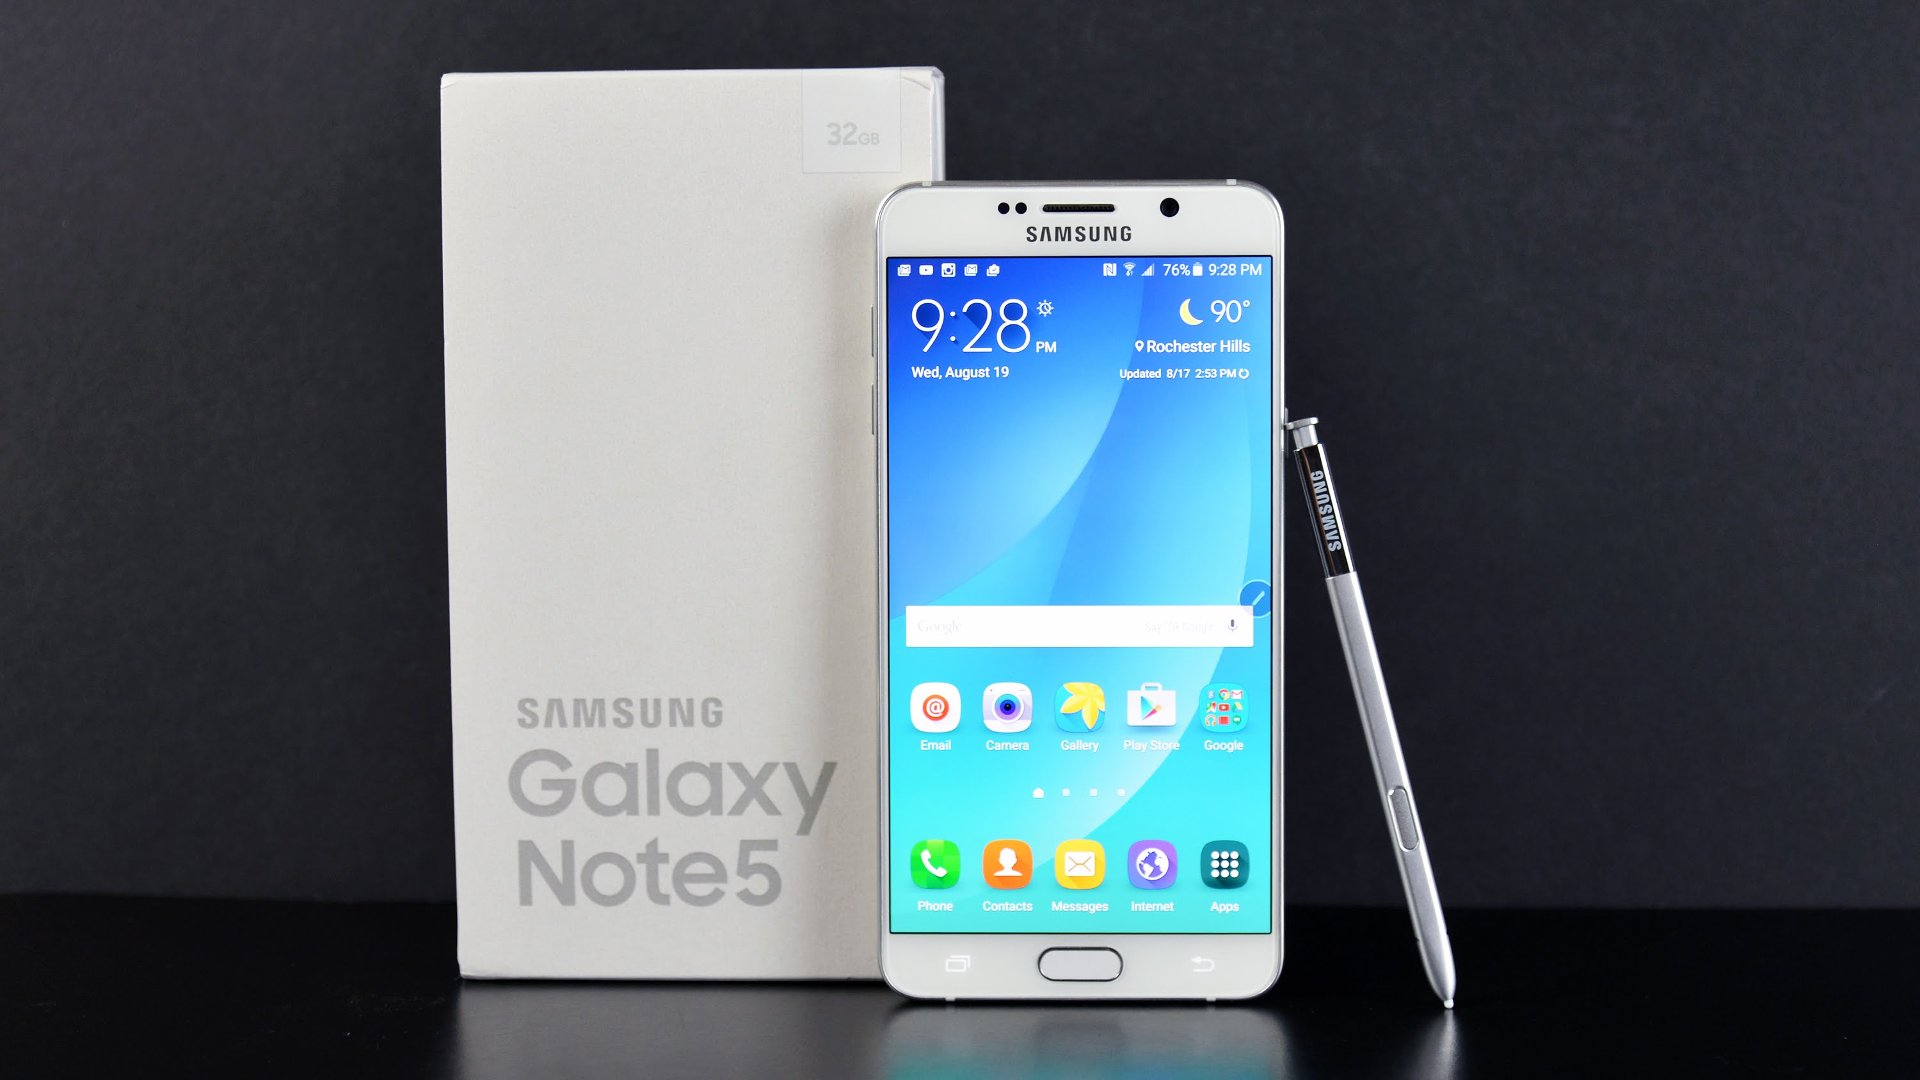 Samsung Galaxy Note 5 Default Home Screen Explained - Prime Inspiration